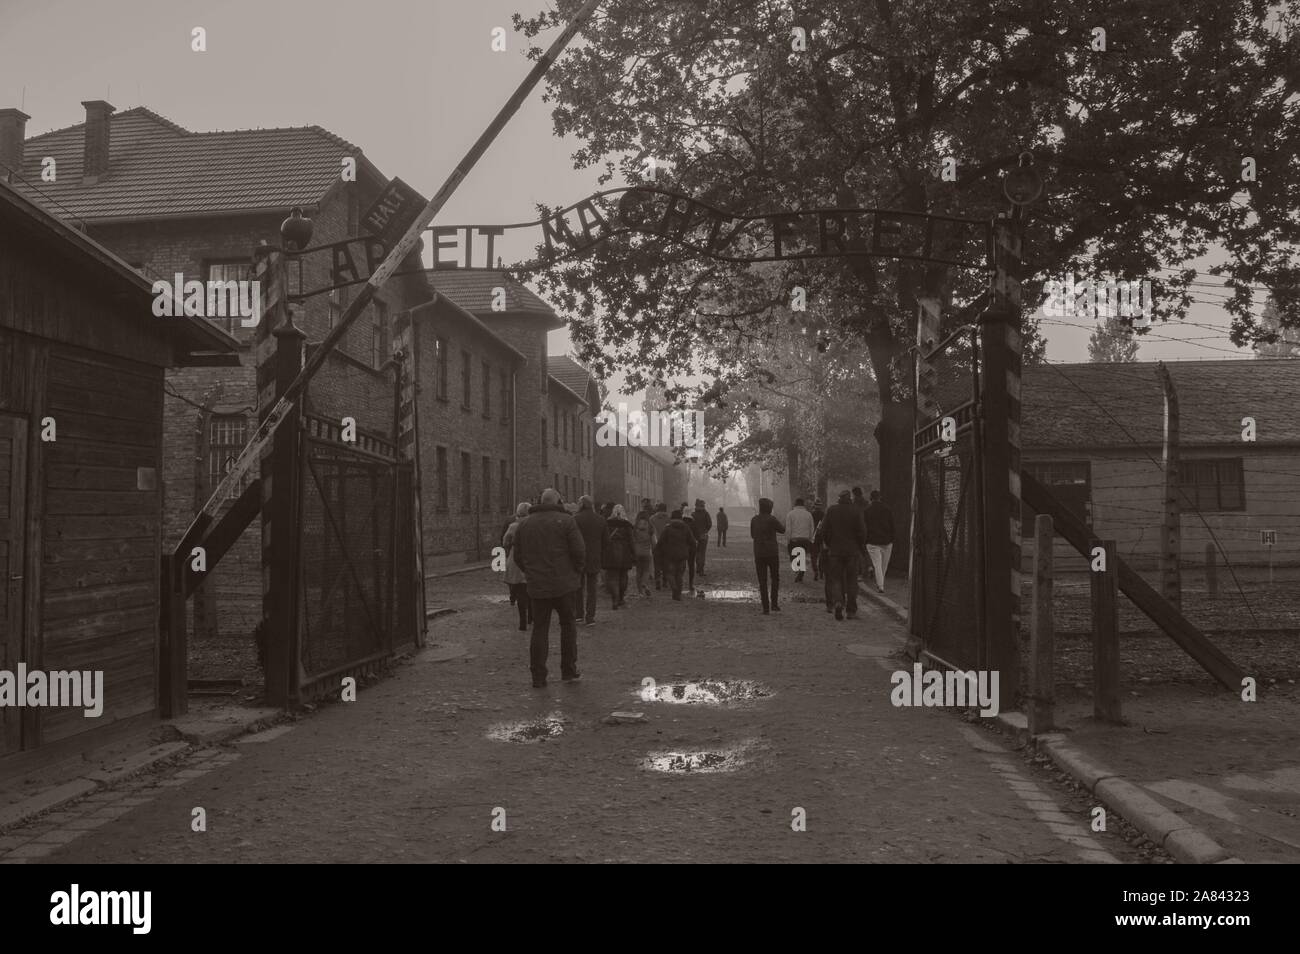 The main gate of the concentration camp Auschwitz - Holocaust Memorial Museum Stock Photo